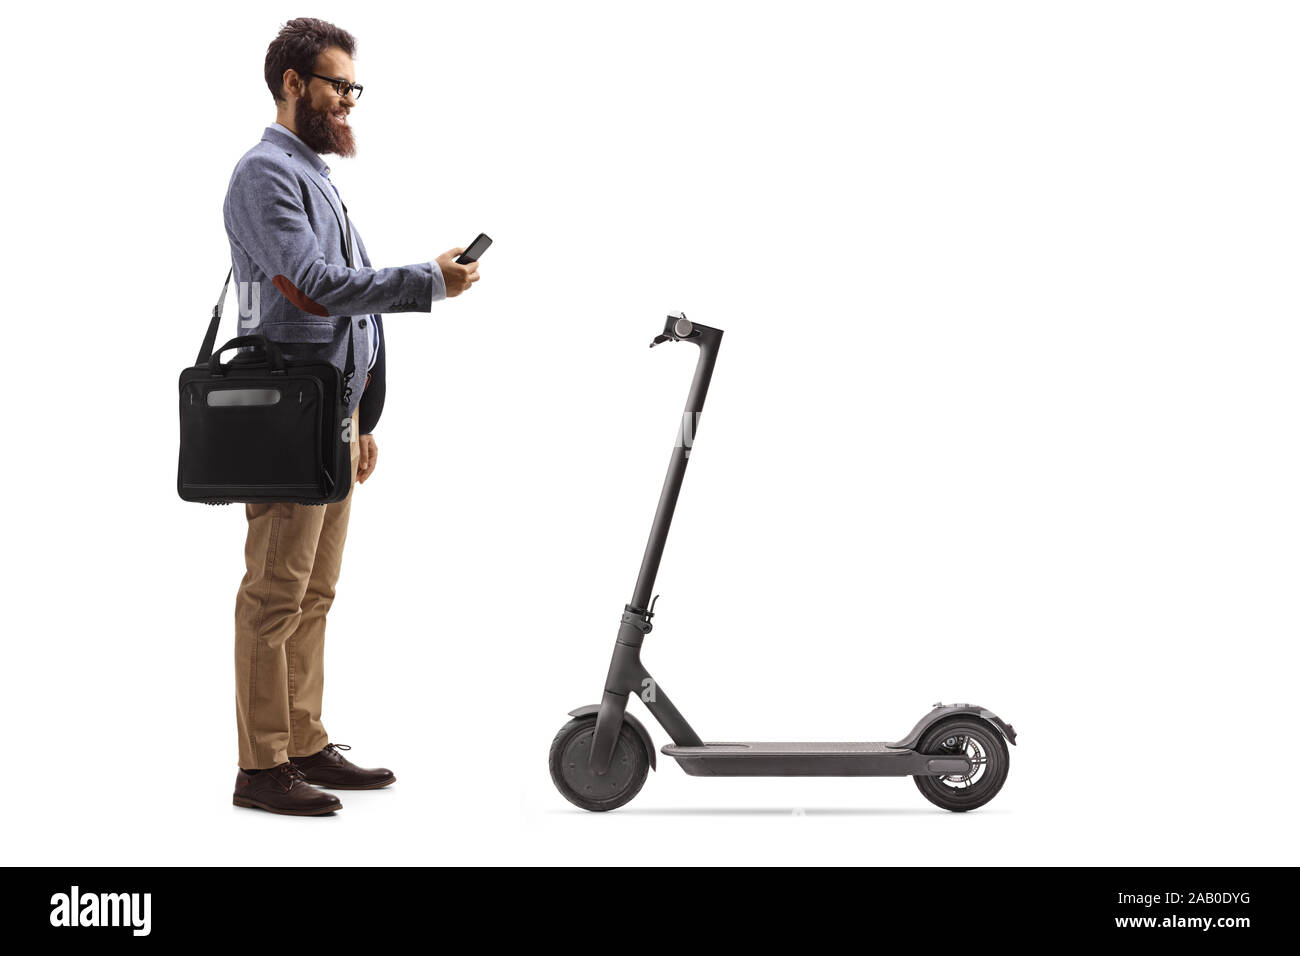 Bearded man with a laptop case renting a scooter with a mobile phone isolated on white background Stock Photo